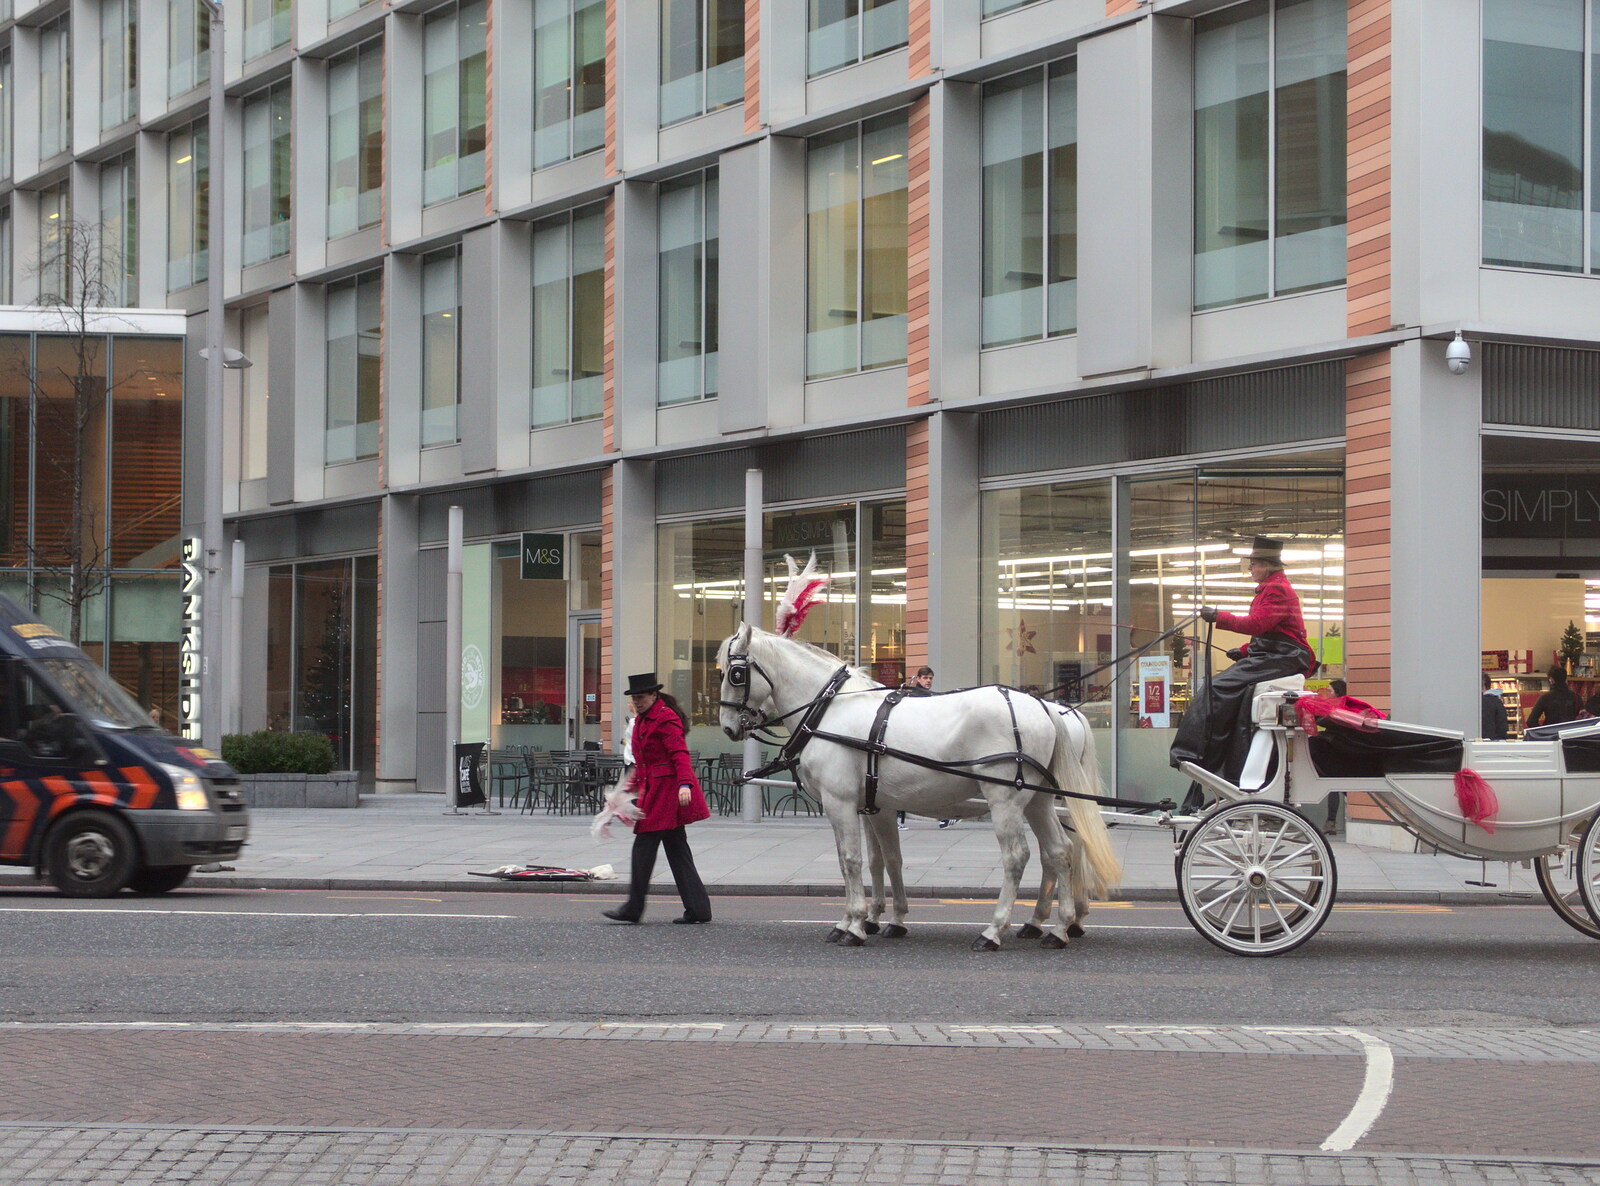 A carriage and footman on Southwark Street from Southwark, Norwich, and a Power Cut, London, Norfolk and Suffolk - 12th December 2015